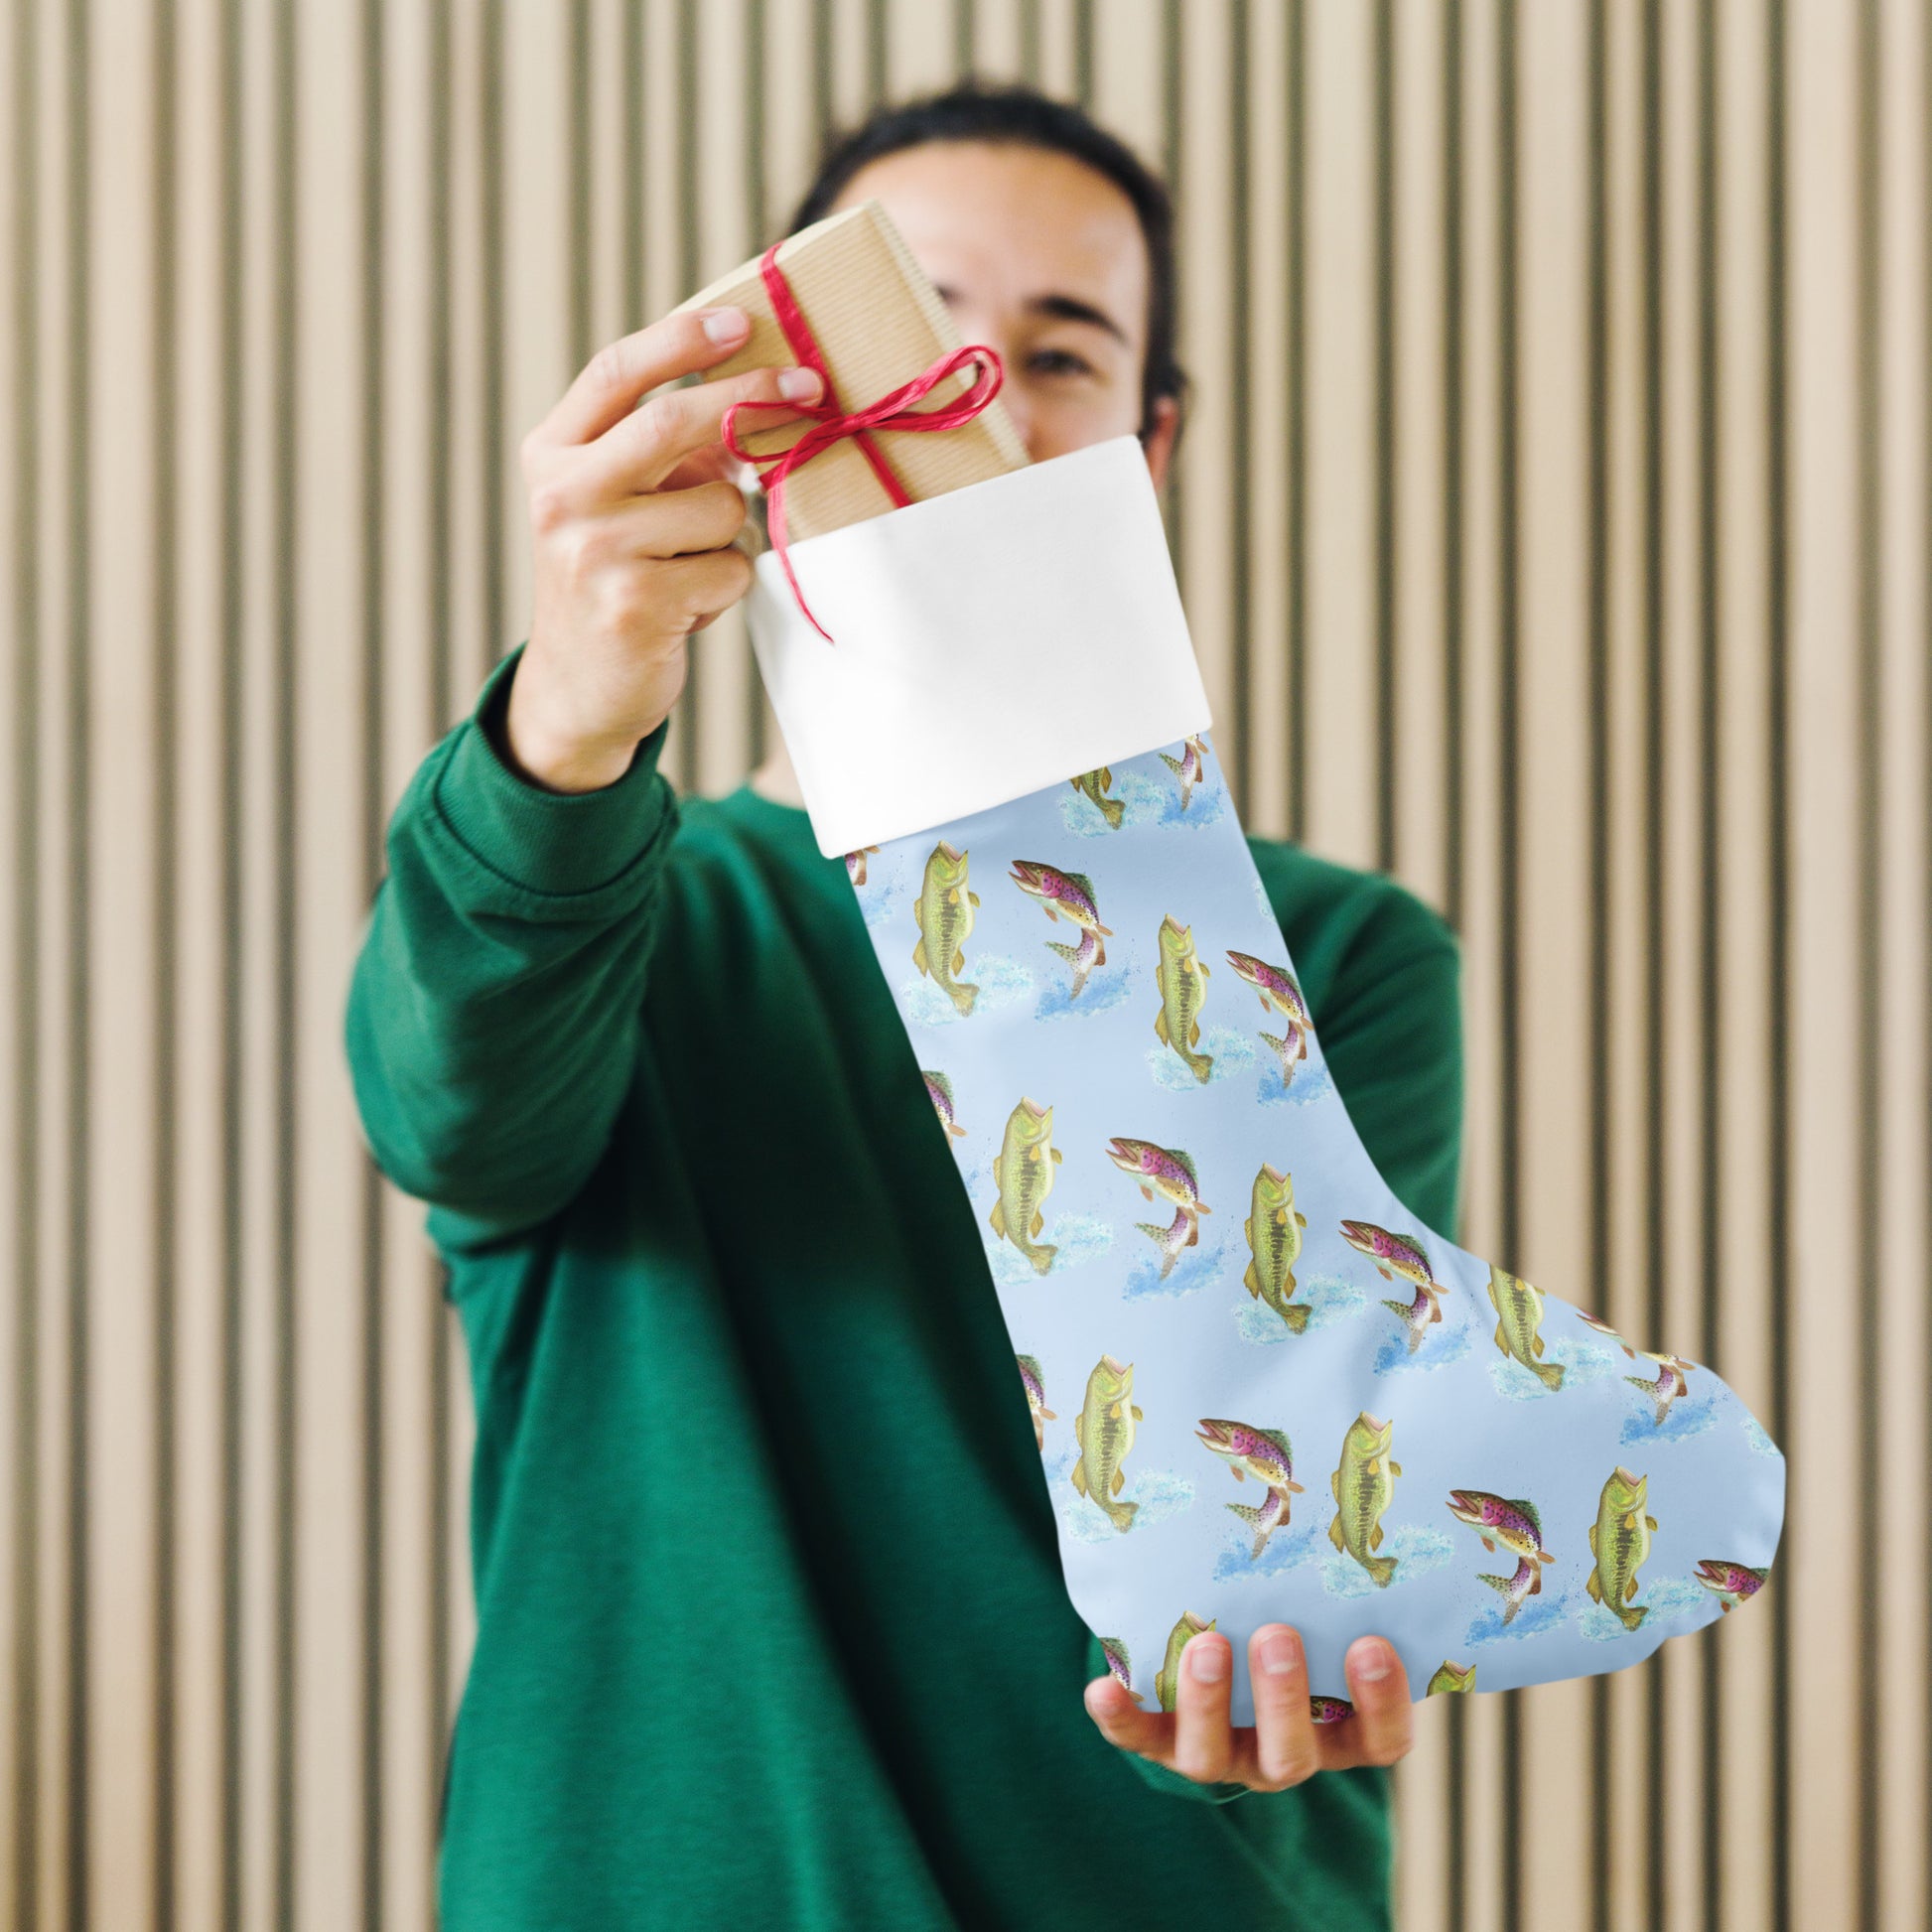 Limited Edition Blue Fishing Christmas Stocking.  7 by 18 inches. The front has watercolor rainbow trout and largemouth bass patterned on a blue background and an off-white polyester back fabric. It has a white fold-over cuff and a hanging loop. Shown being held by male model.